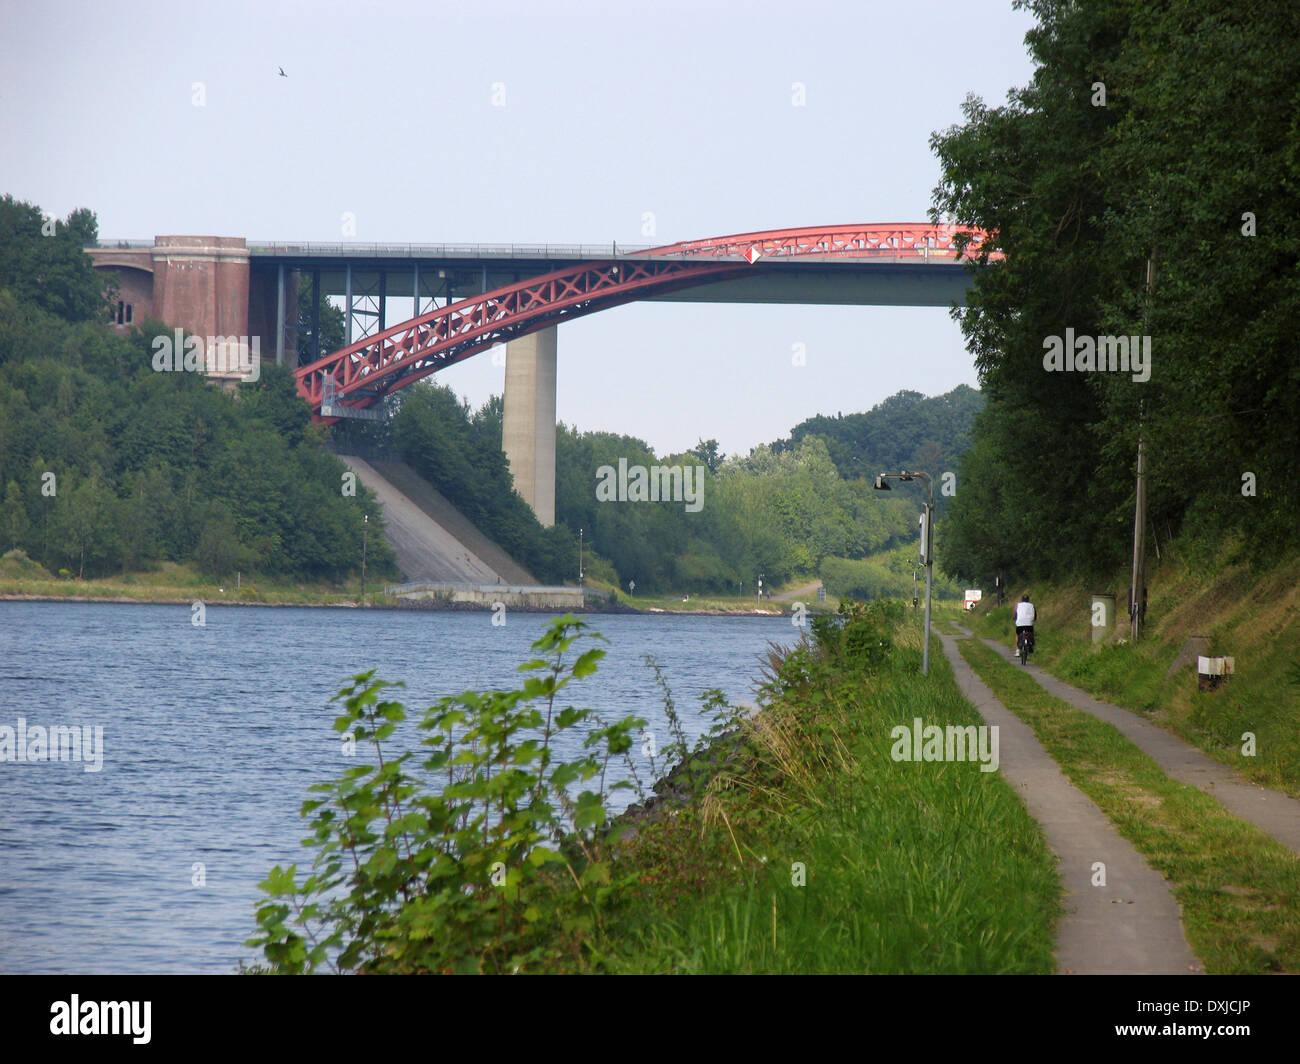 The Kiel Canal. The Kiel Canal connects the North Sea with the Baltic Sea (Kiel Fjord). This waterway is the most frequented artificial waterway in the world based on the number of ships. Photo: Klaus Nowottnick Date: August 07, 2007 Stock Photo